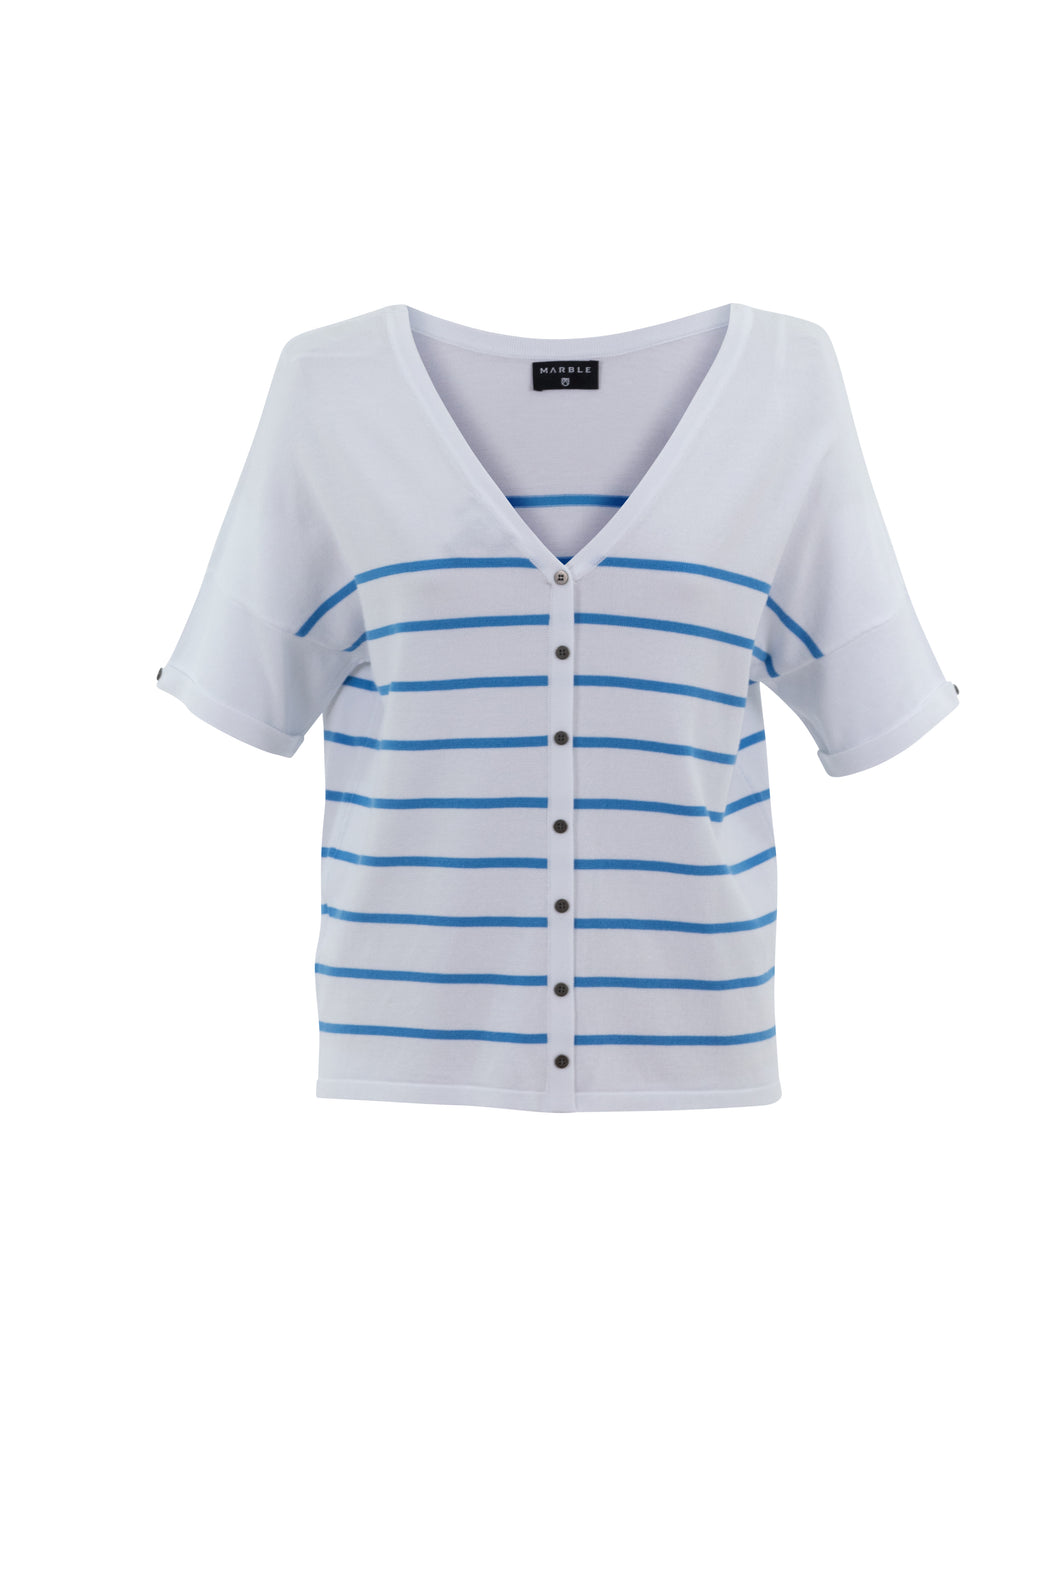 Marble Powder Blue Mock Button Reversible V-Neck Cap Sleeve Stripe Tee Style Sweater